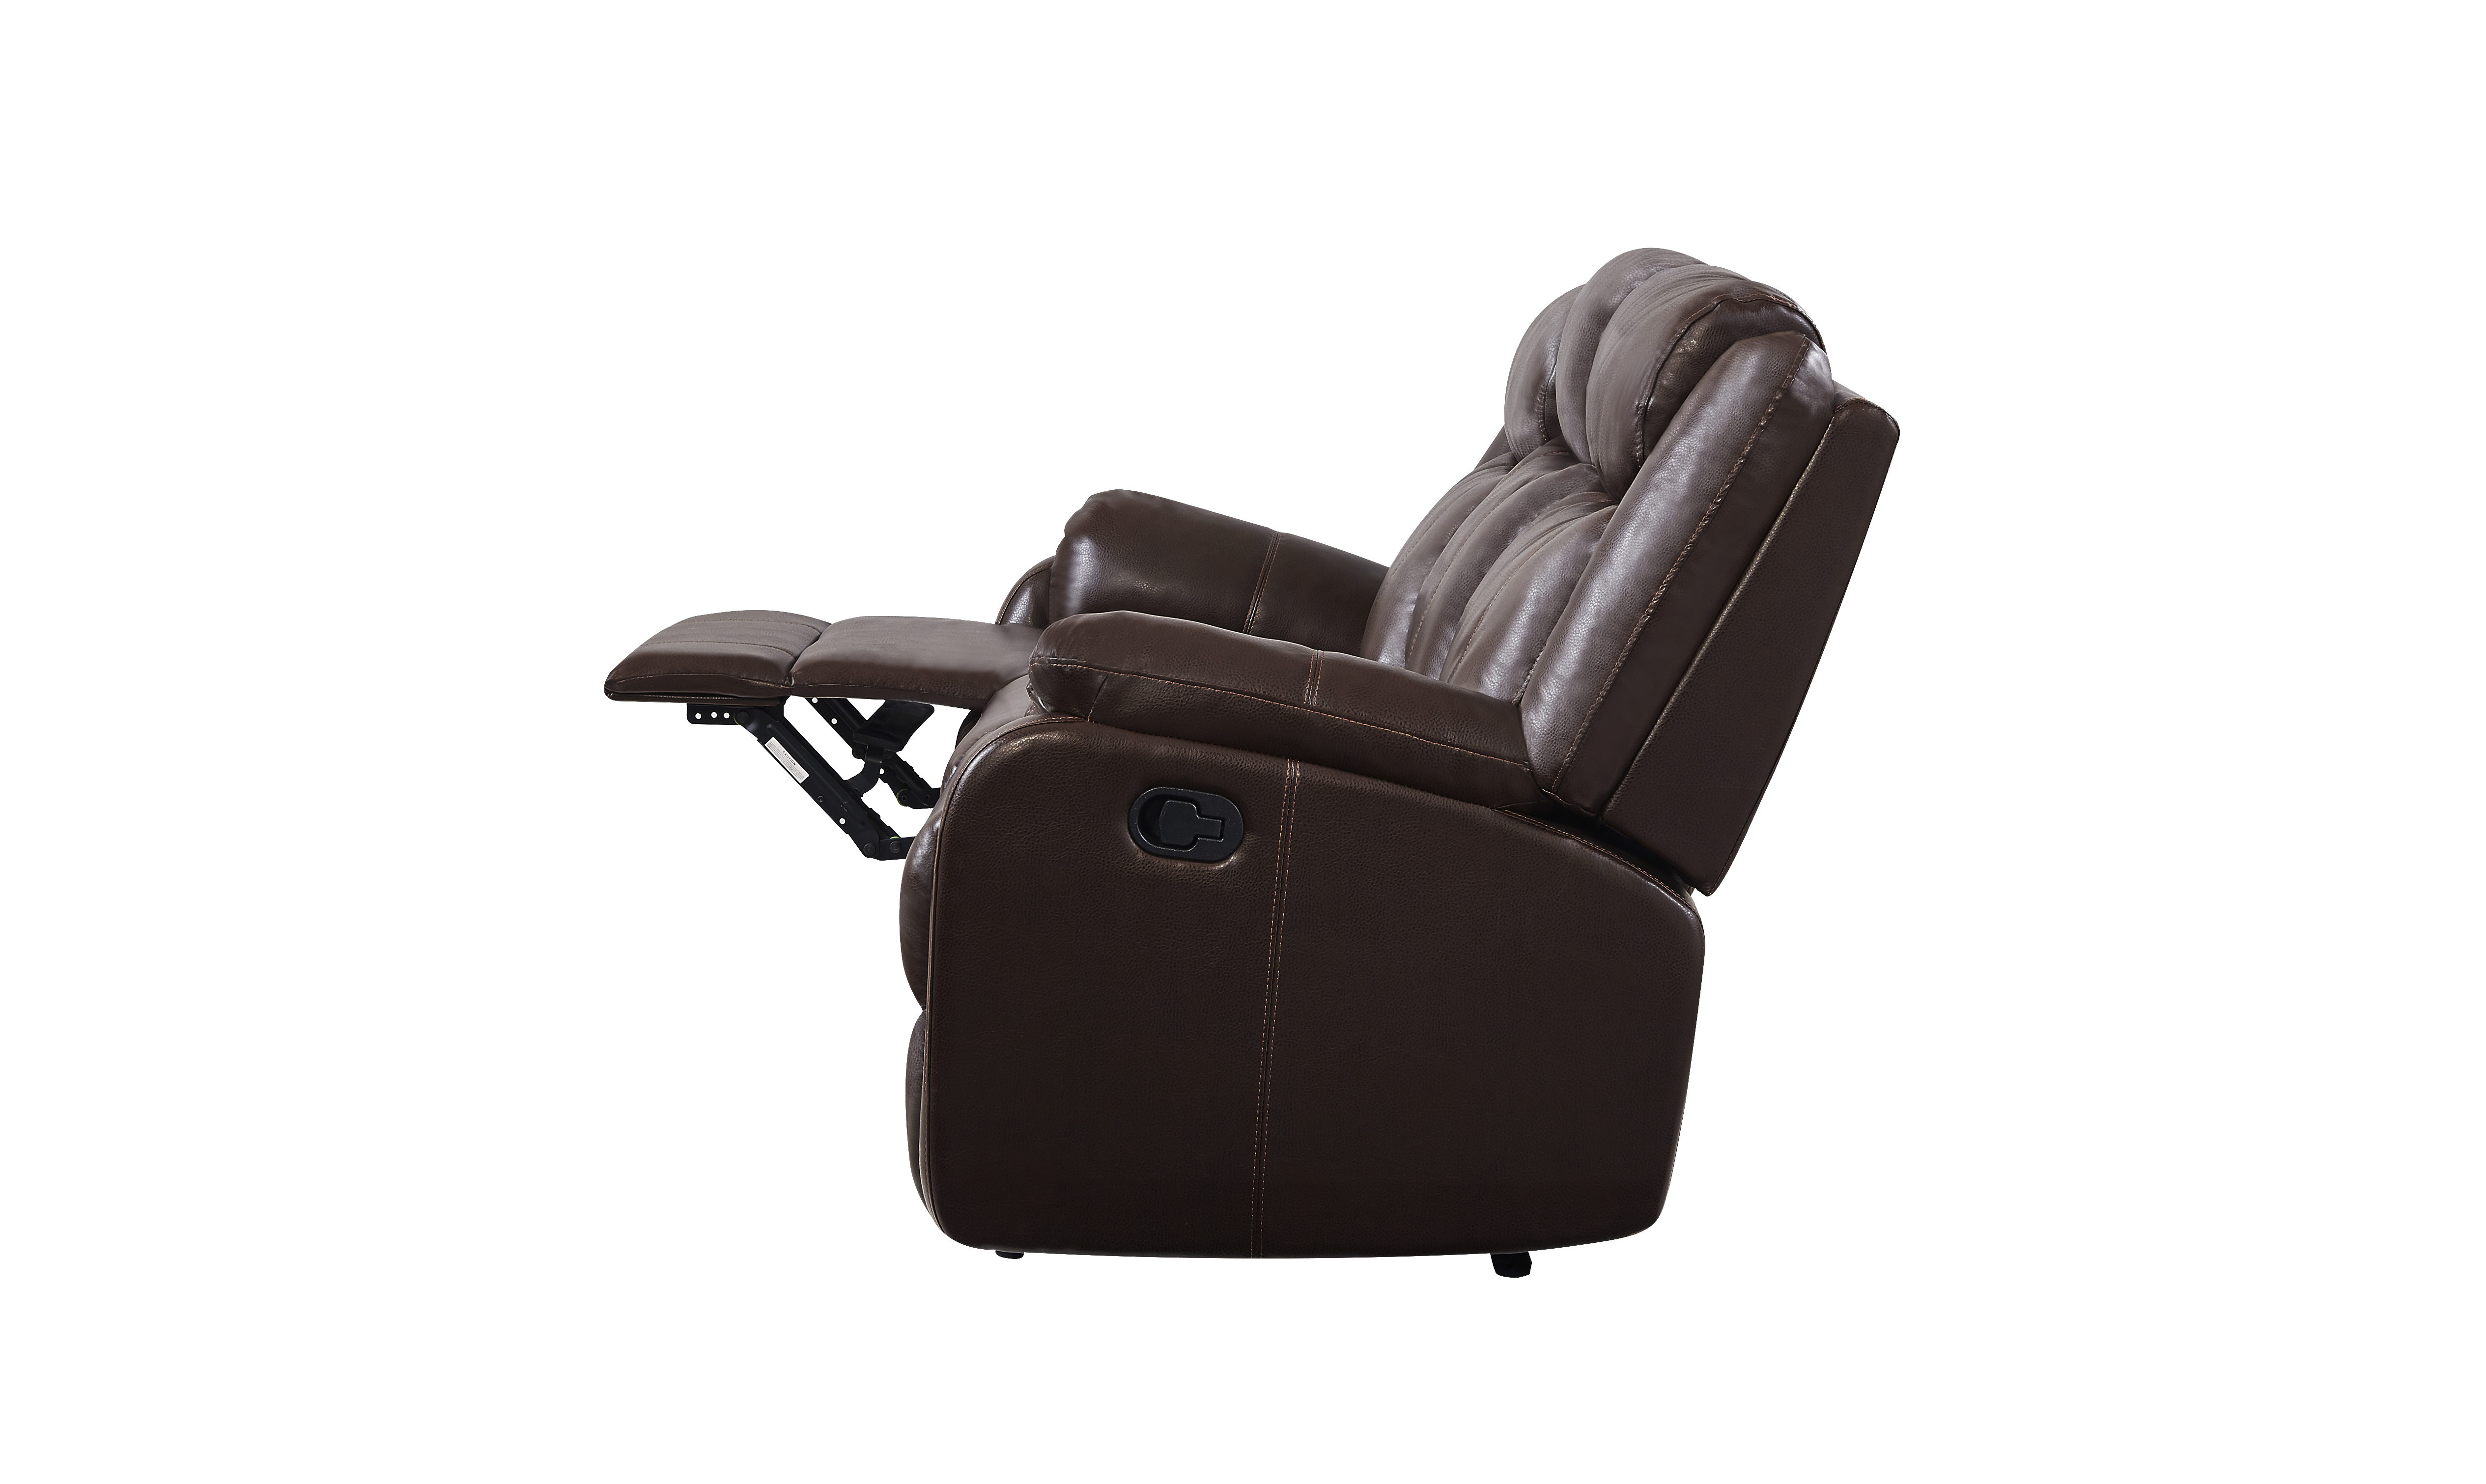 Drawer Reclining Sofa in Brown - image 9 of 10